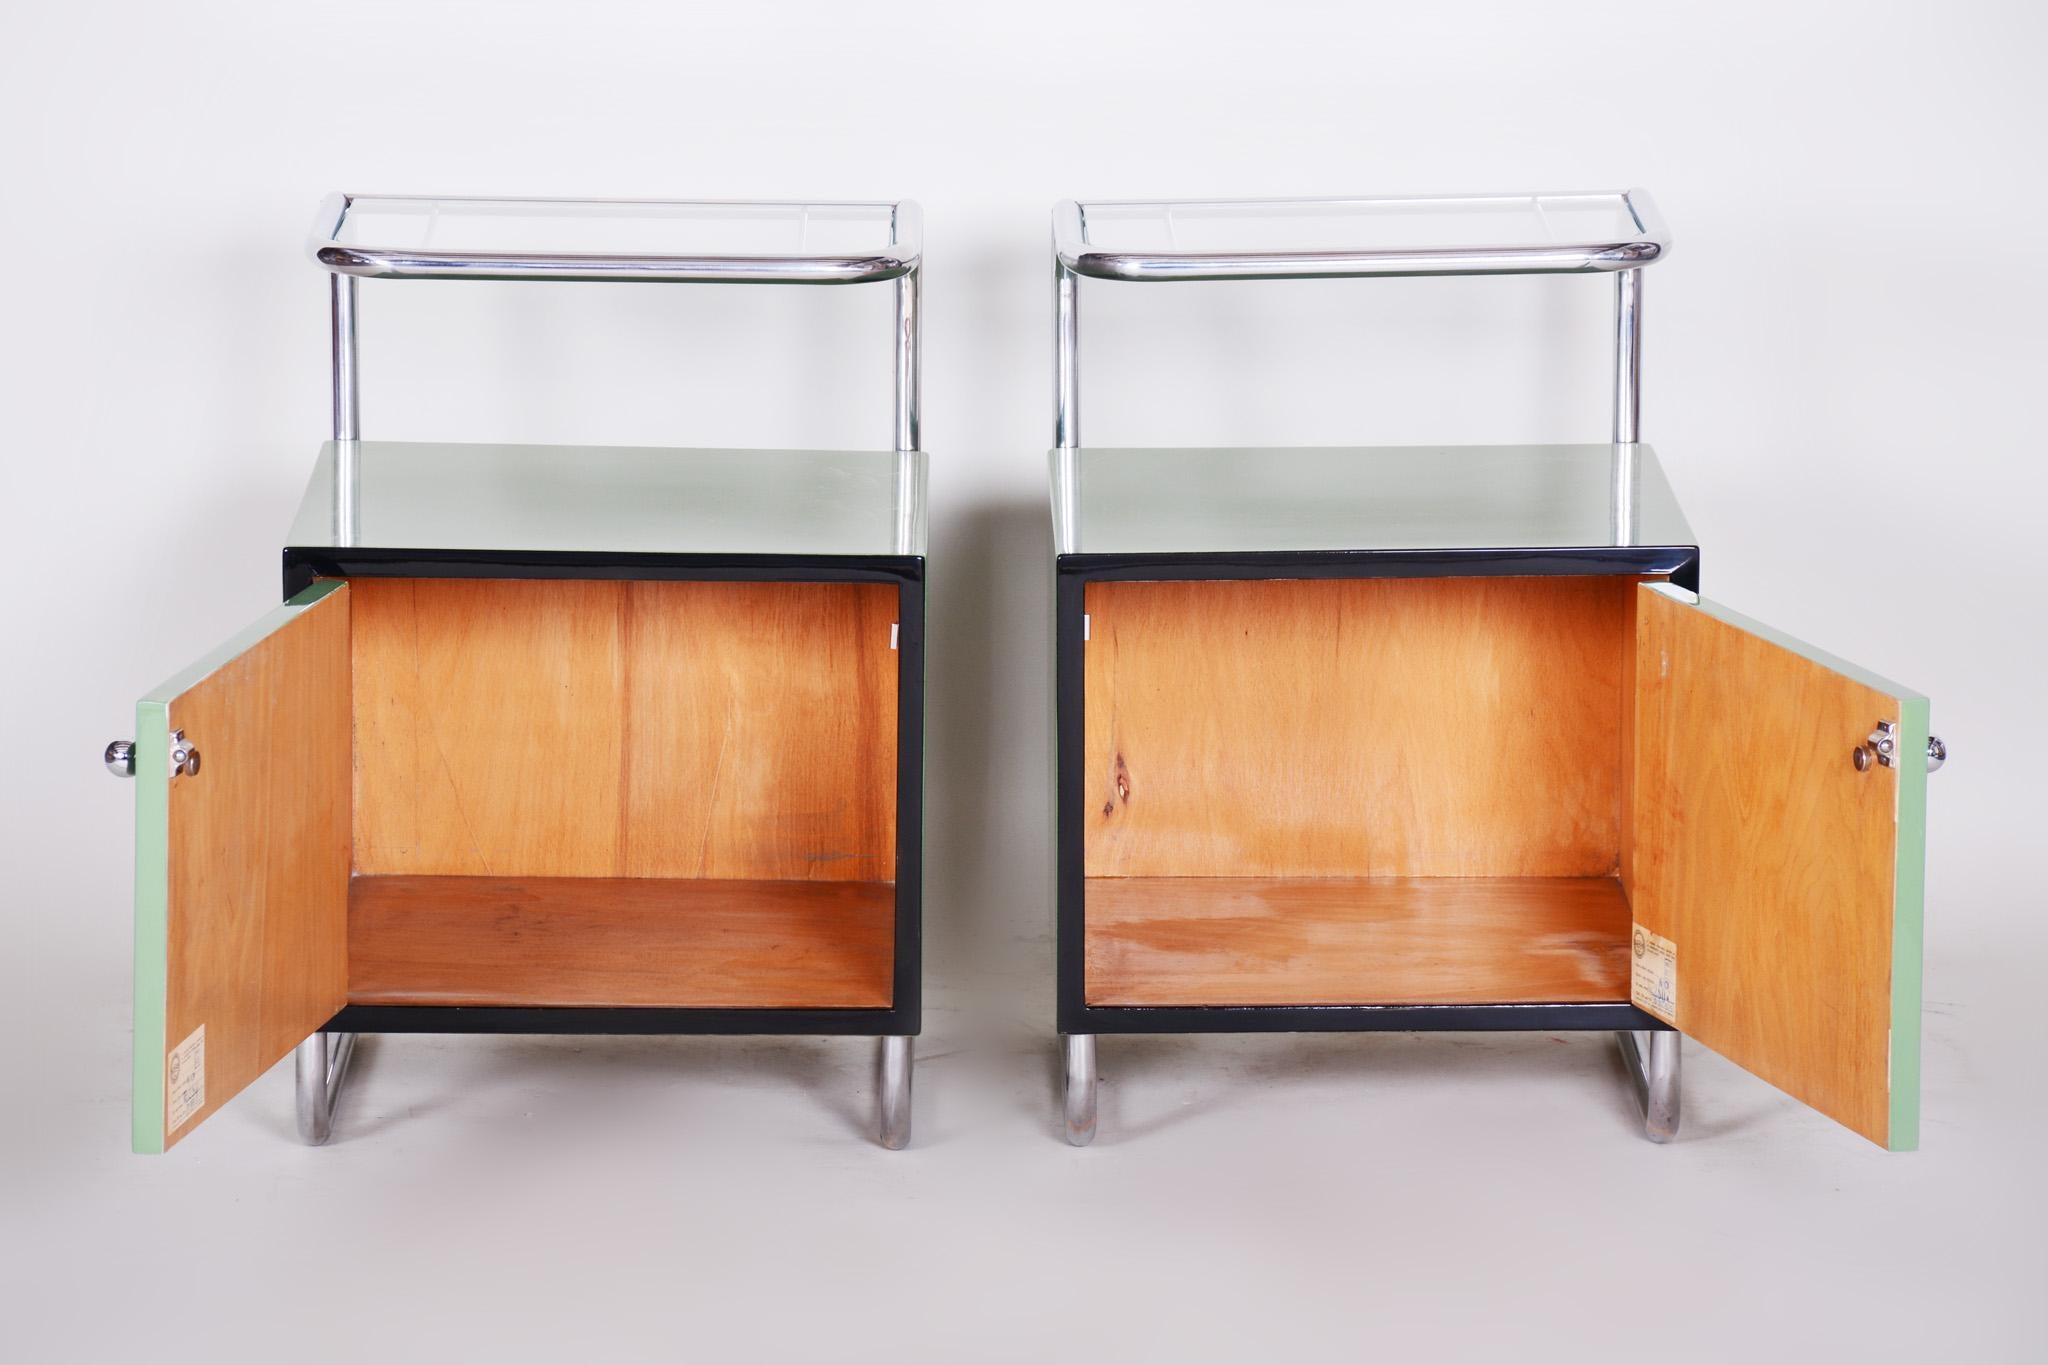 Czech Pair of Green Vintage Bauhaus Bed Side Tables, Vichr, 1930s Glass Removable Desk